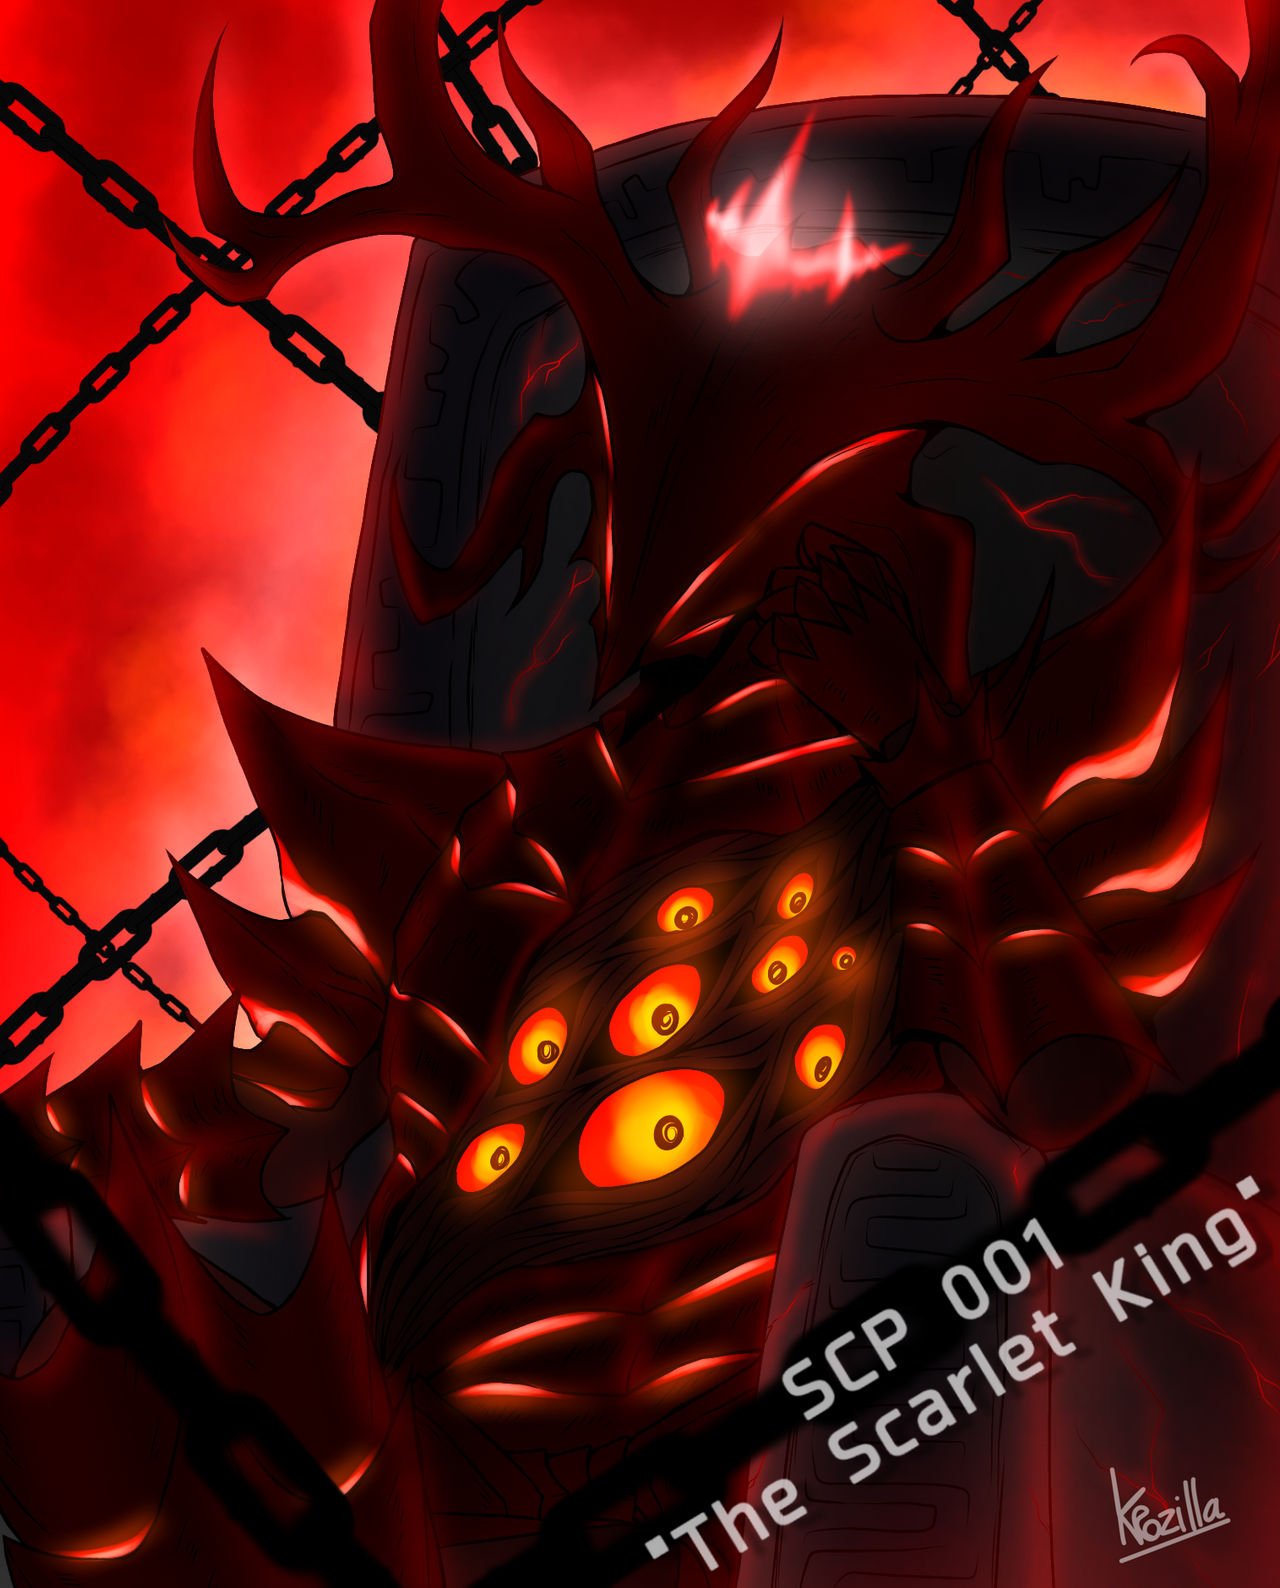 SCP 001 : The Scarlet King by Krozilla on DeviantArt